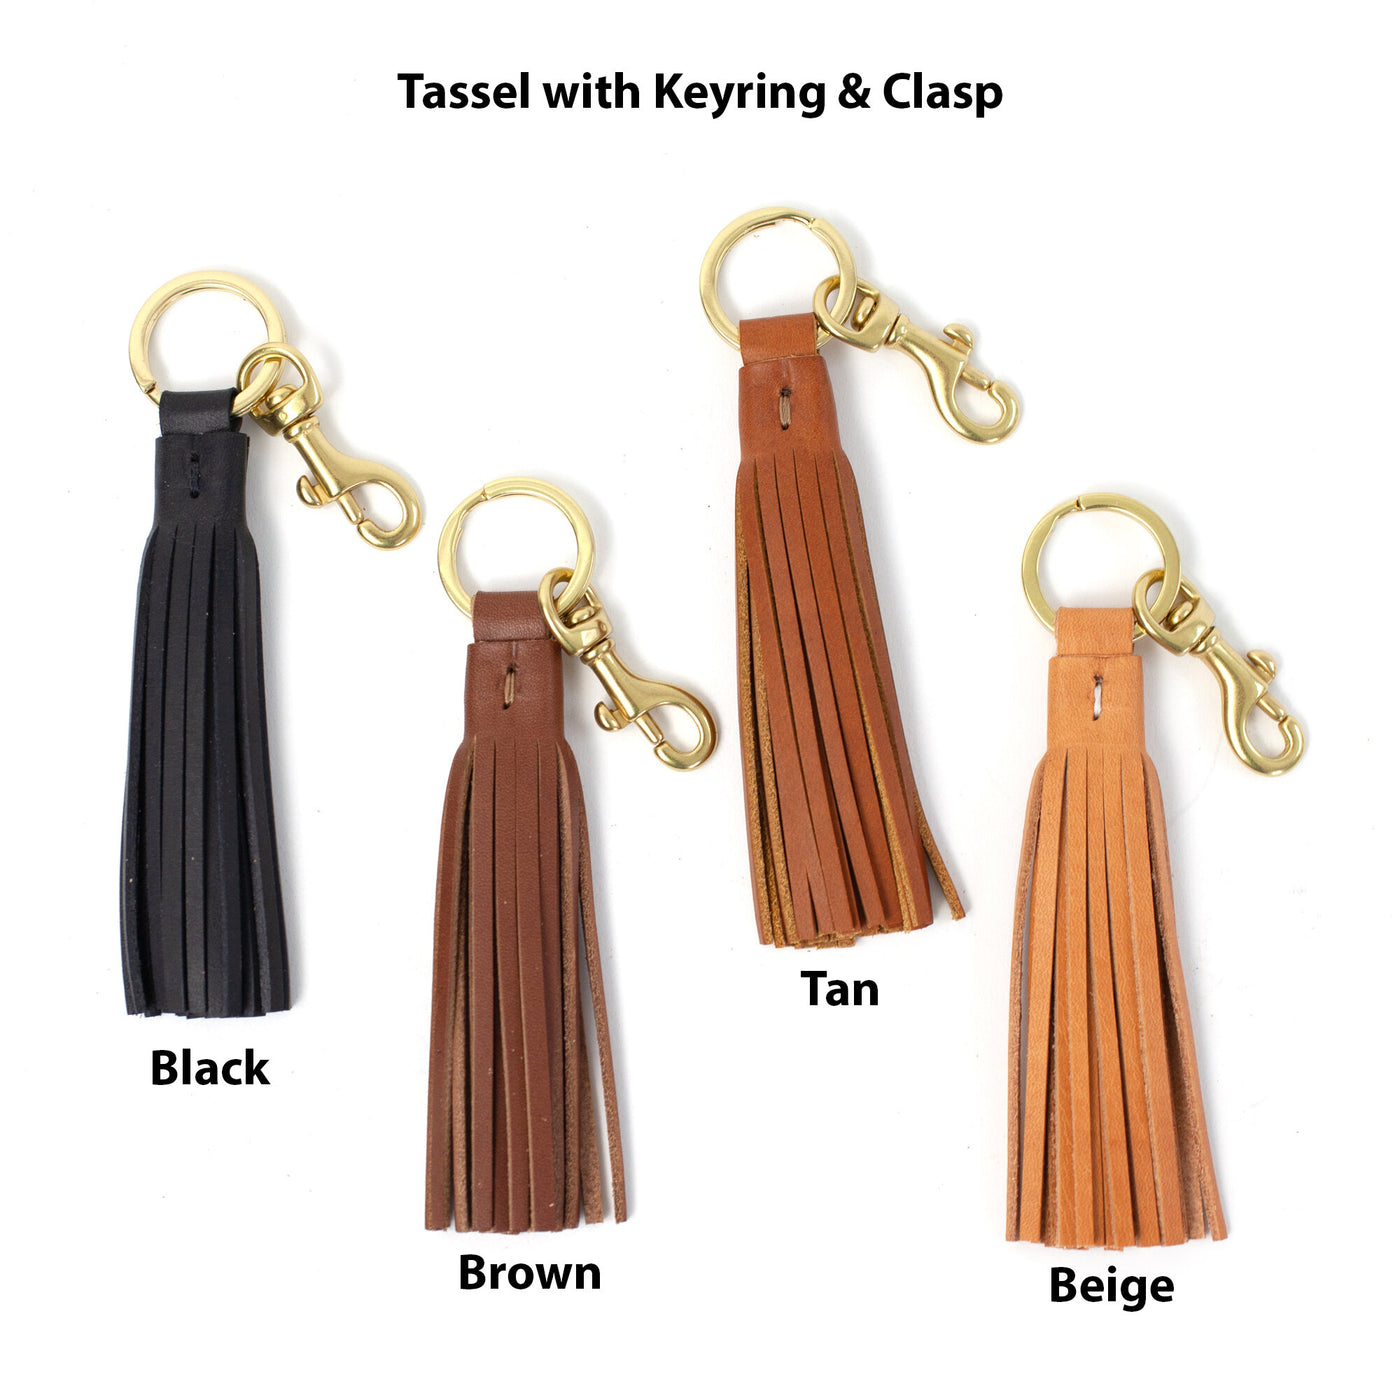 Leather Tassel Zipper Pull and Keyfob with Monogram Tag – Juliette